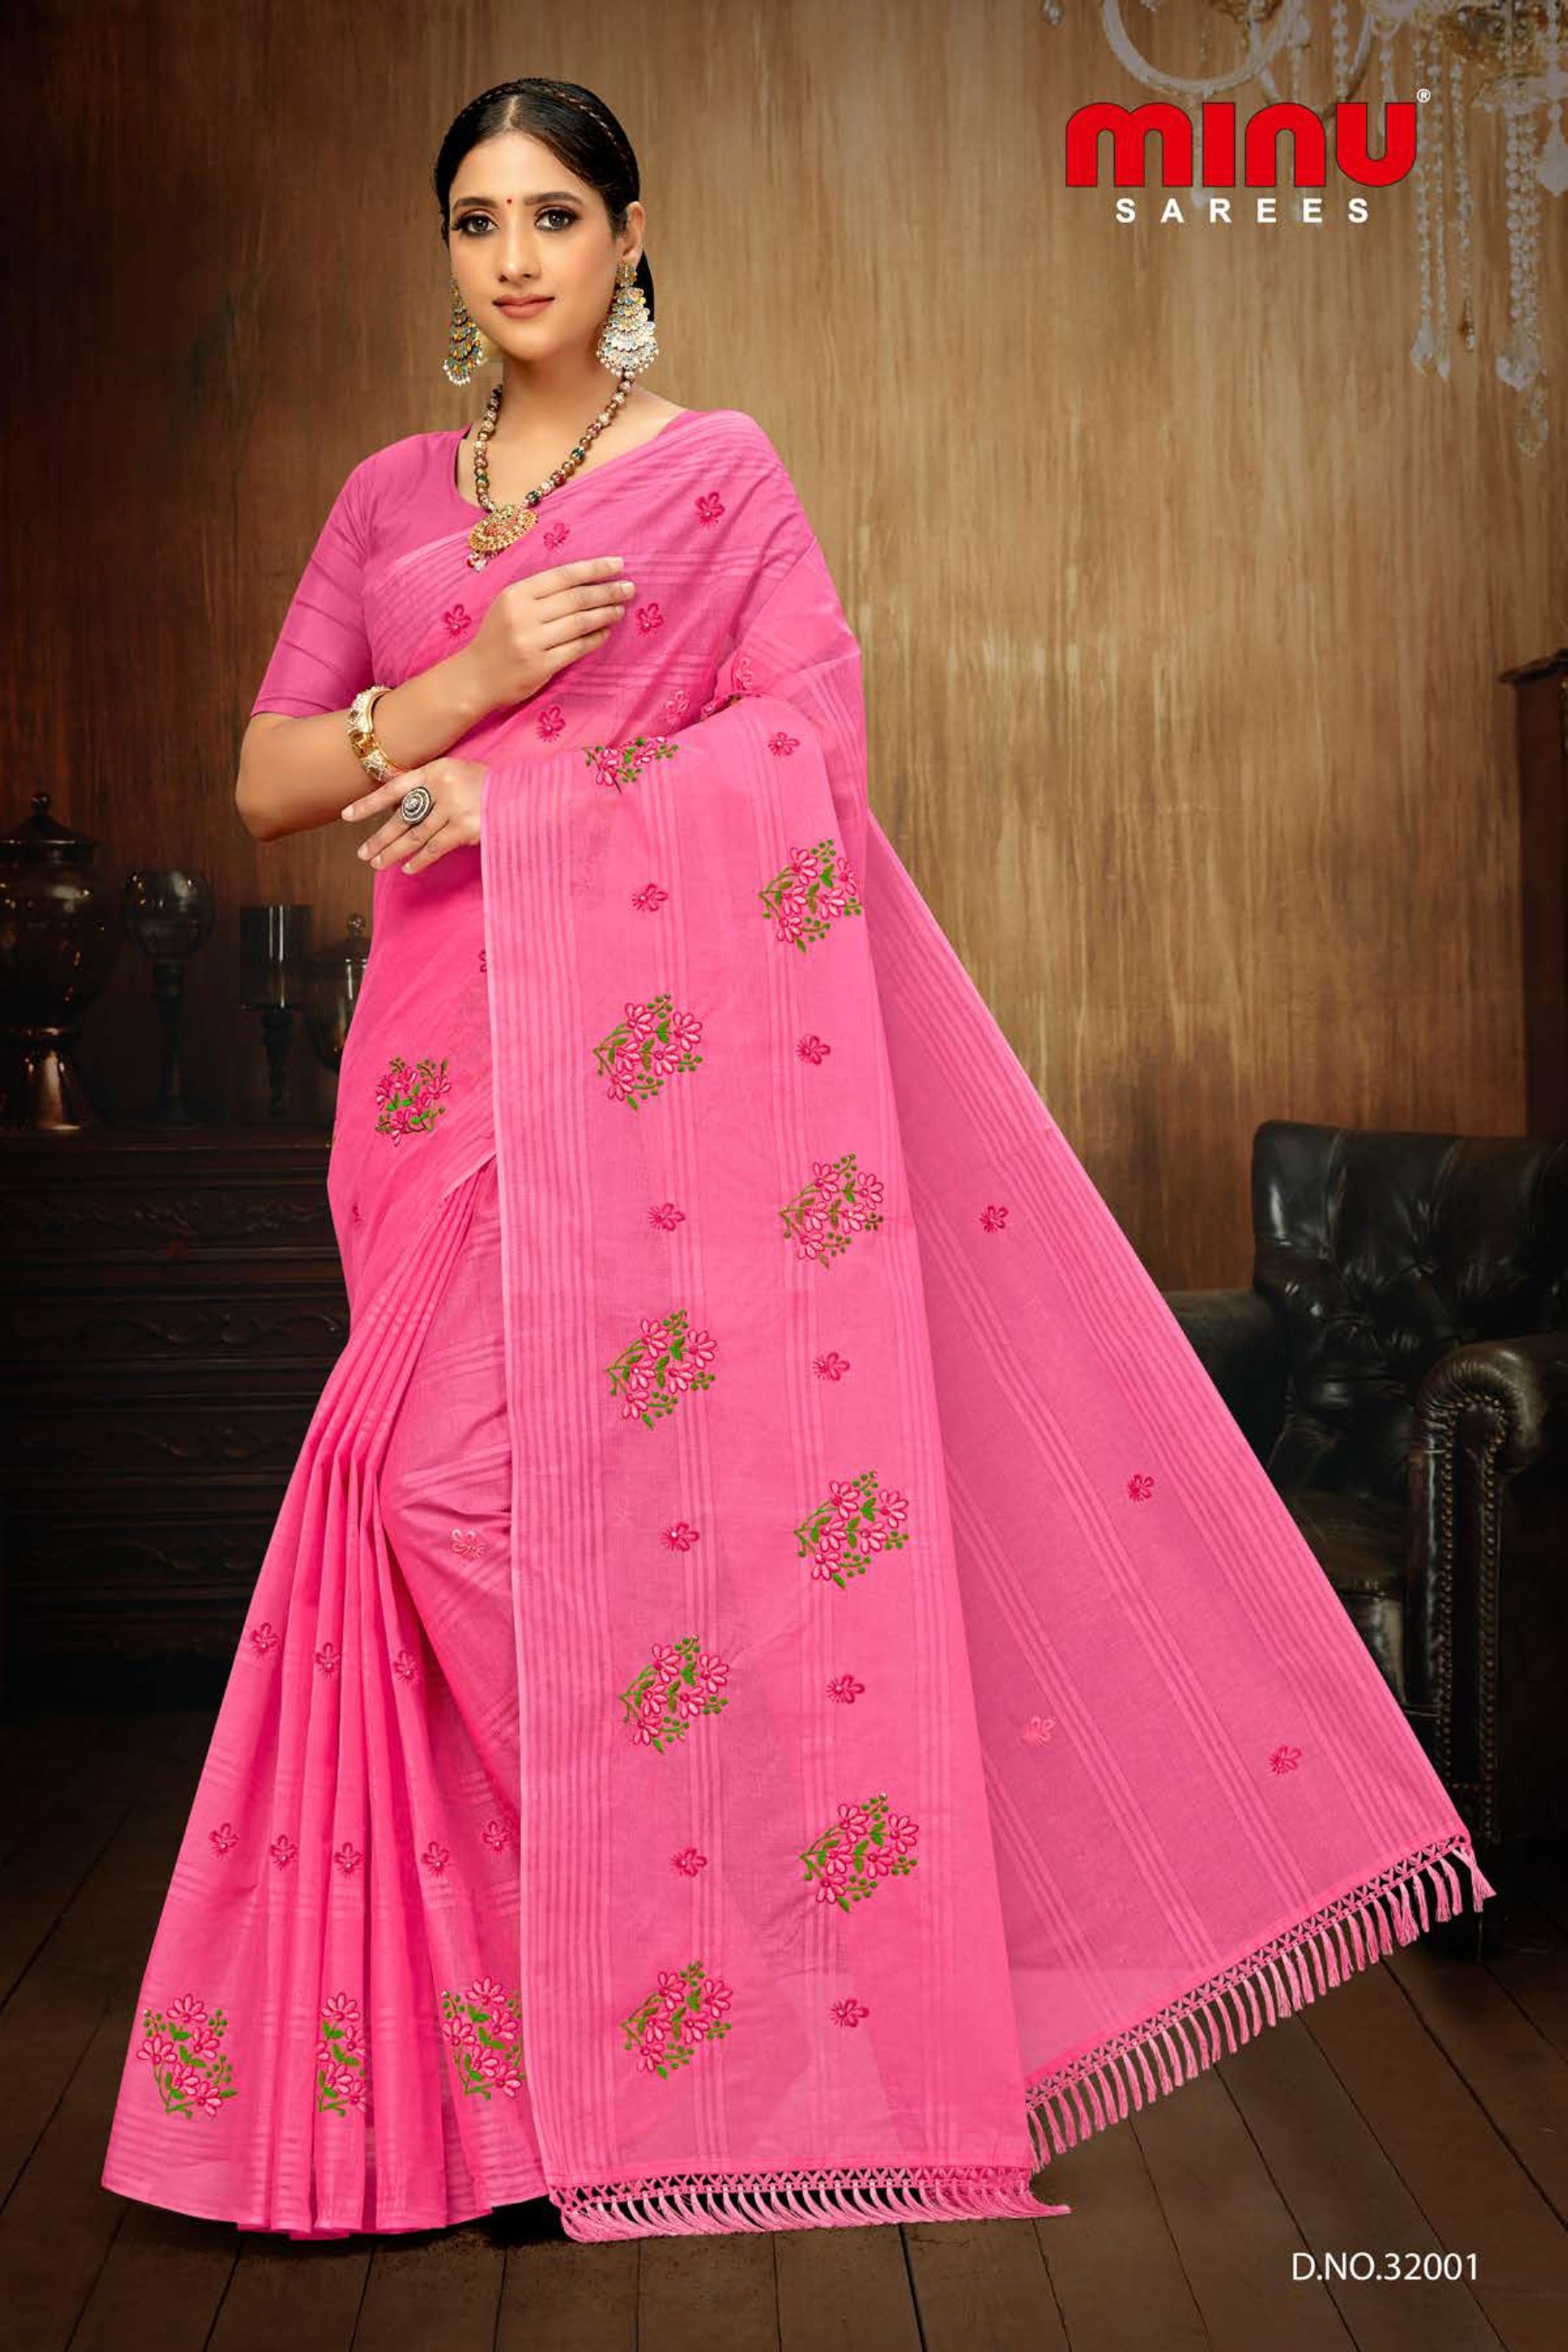 embroidered Saree online at low prices online image 